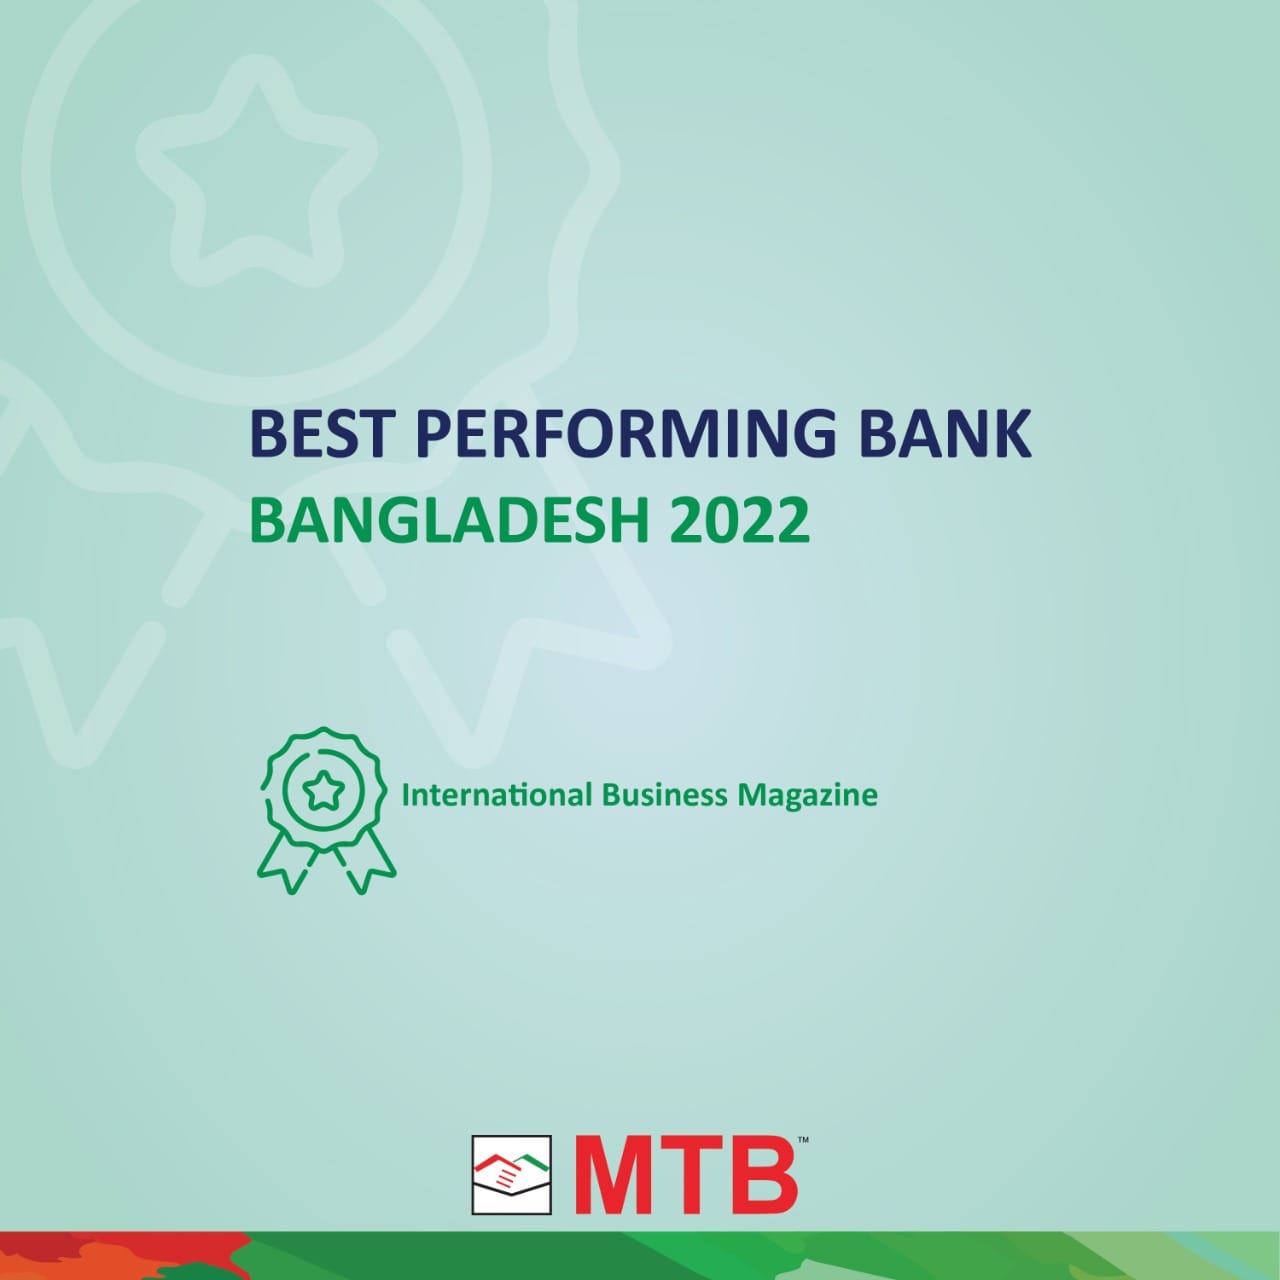 Awards & Recognitions - Mutual Trust Bank PLC